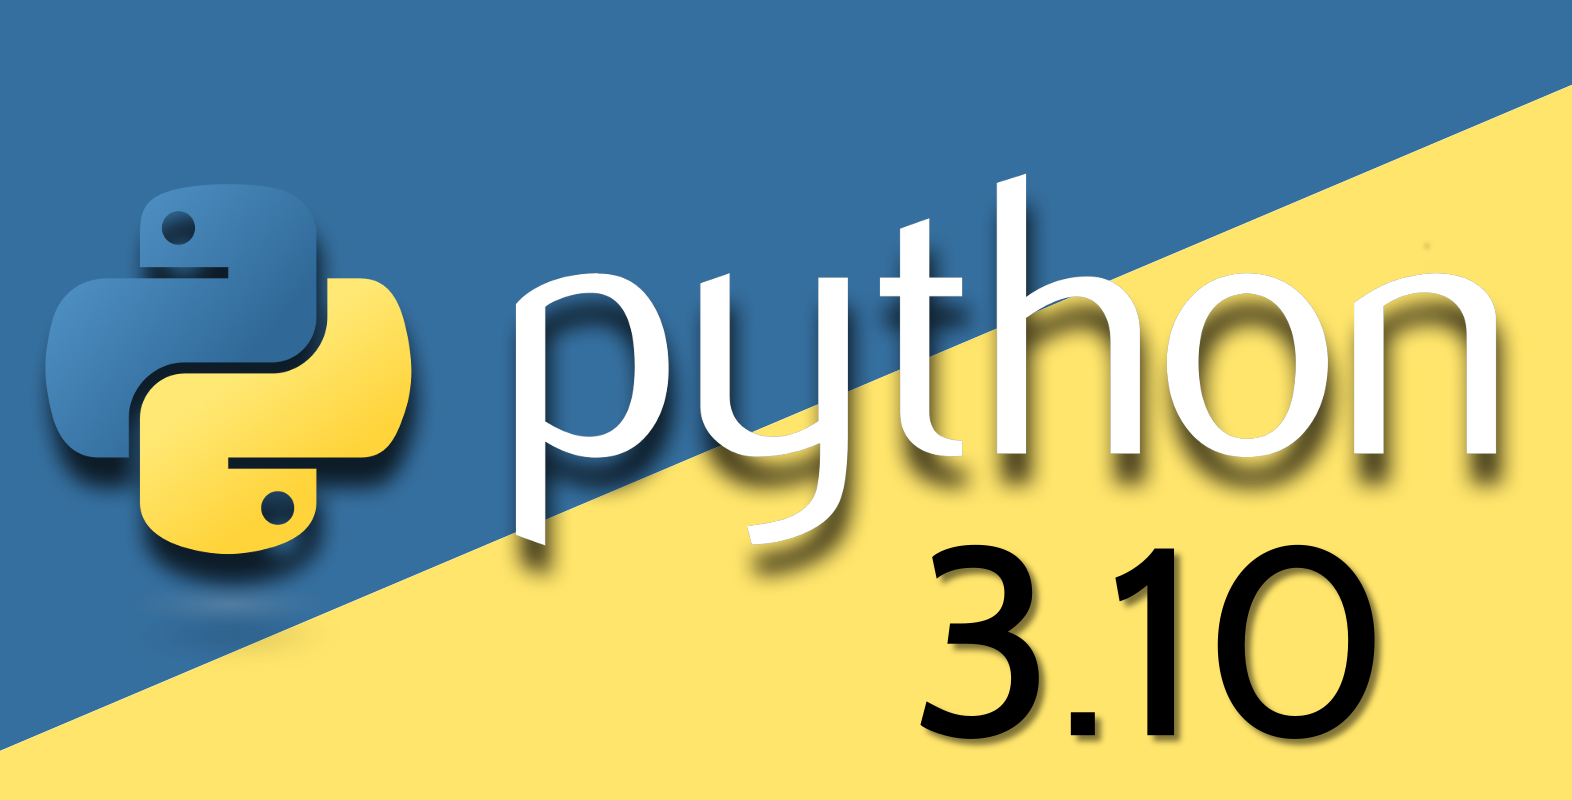 The python logo indicating the 3.10 version